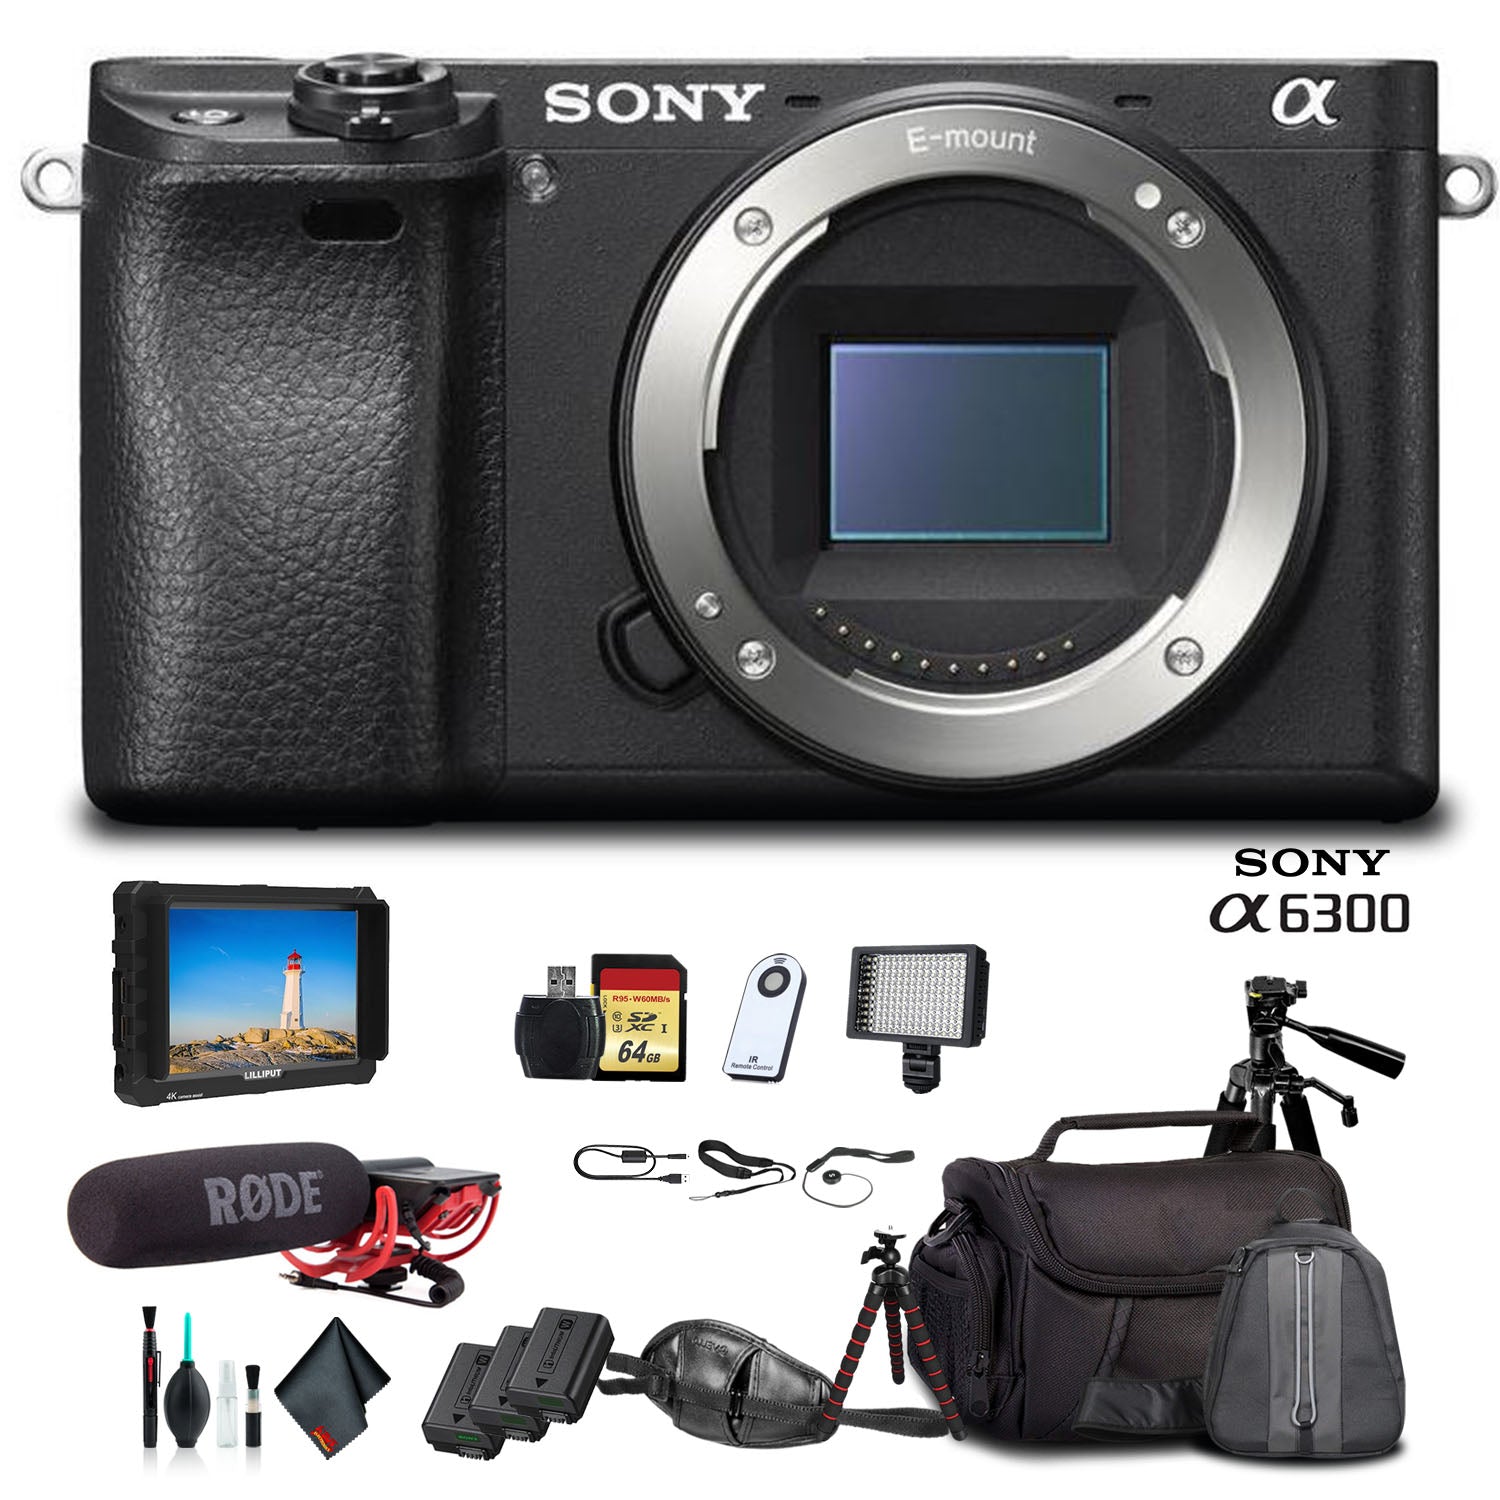 Sony Alpha a6300 Mirrorless Camera Black ILCE6300/B With Soft Bag, Tripod, 2x Extra Batteries, Rode Mic, LED Light, External HD Monitor, 2x 64GB Cards, Card Reader , Plus Essential Accessories